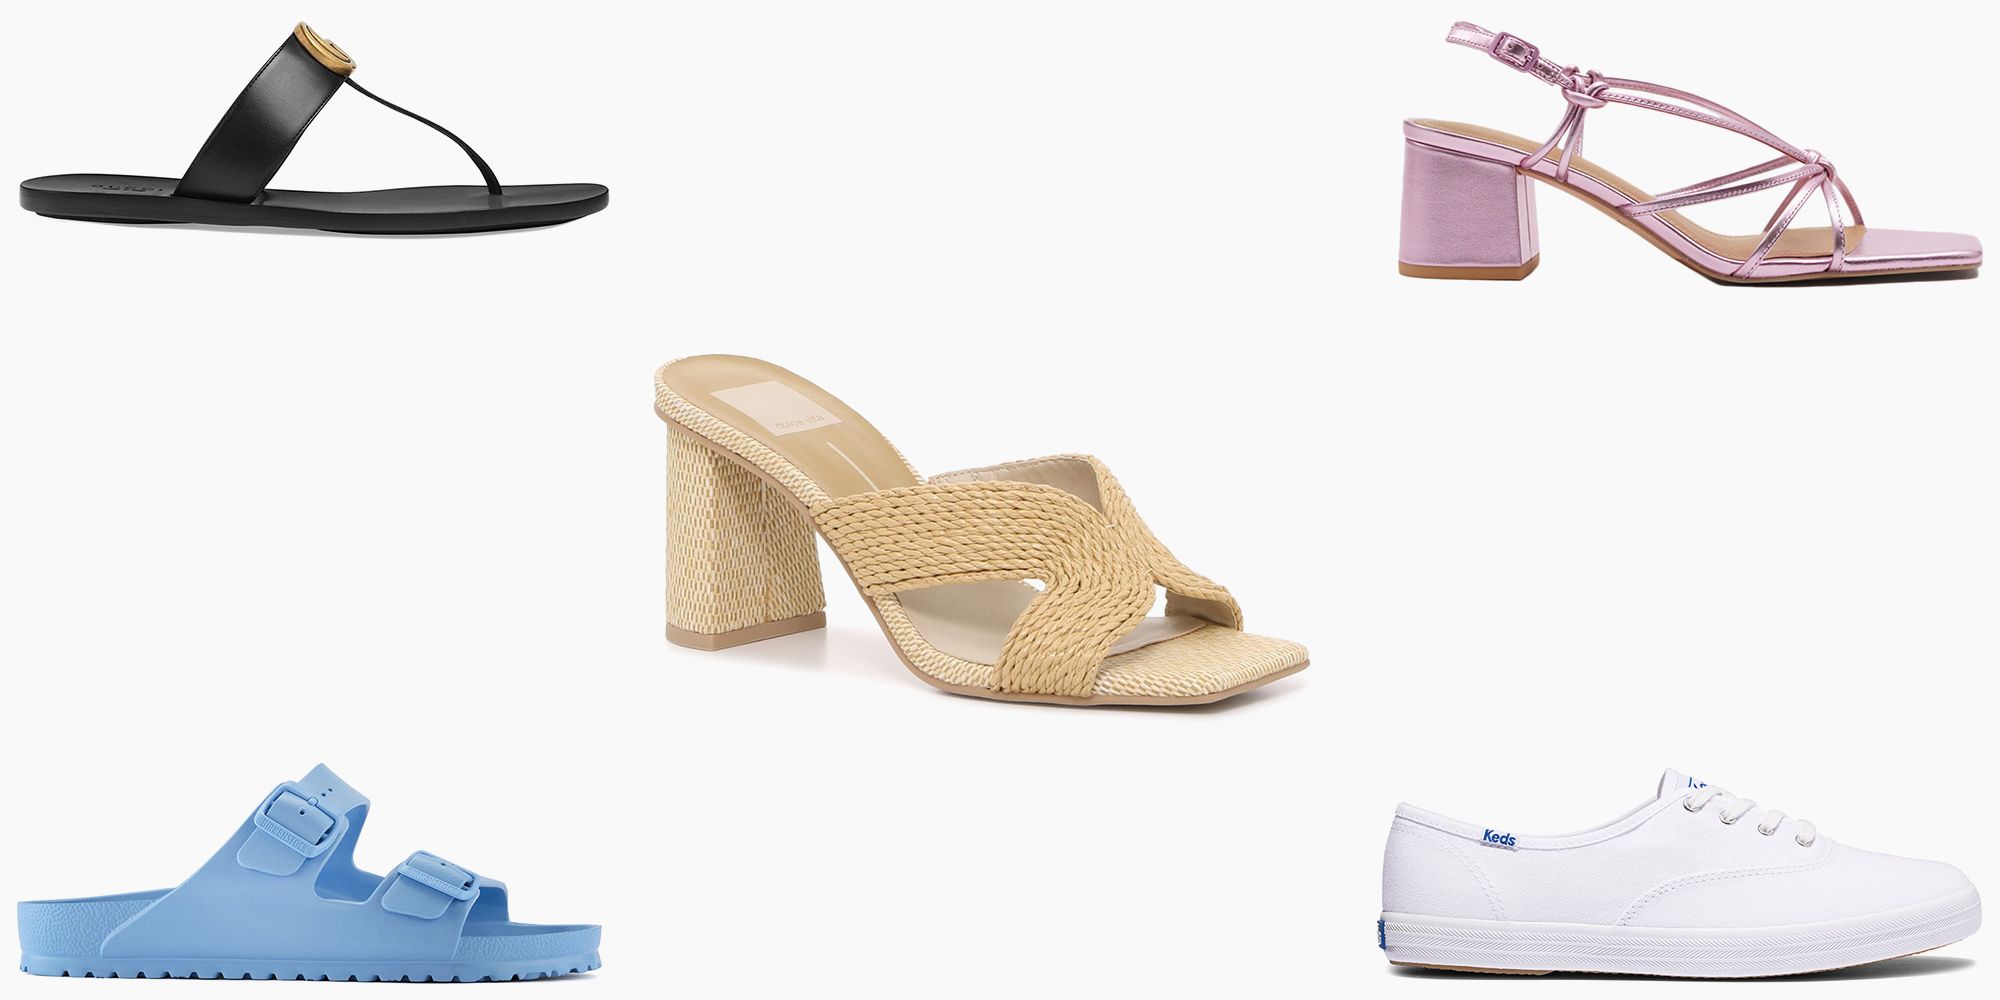 10 Shoes That Every Woman Needs  Staple shoes, Fashion shoes, Minimalist  wardrobe capsule